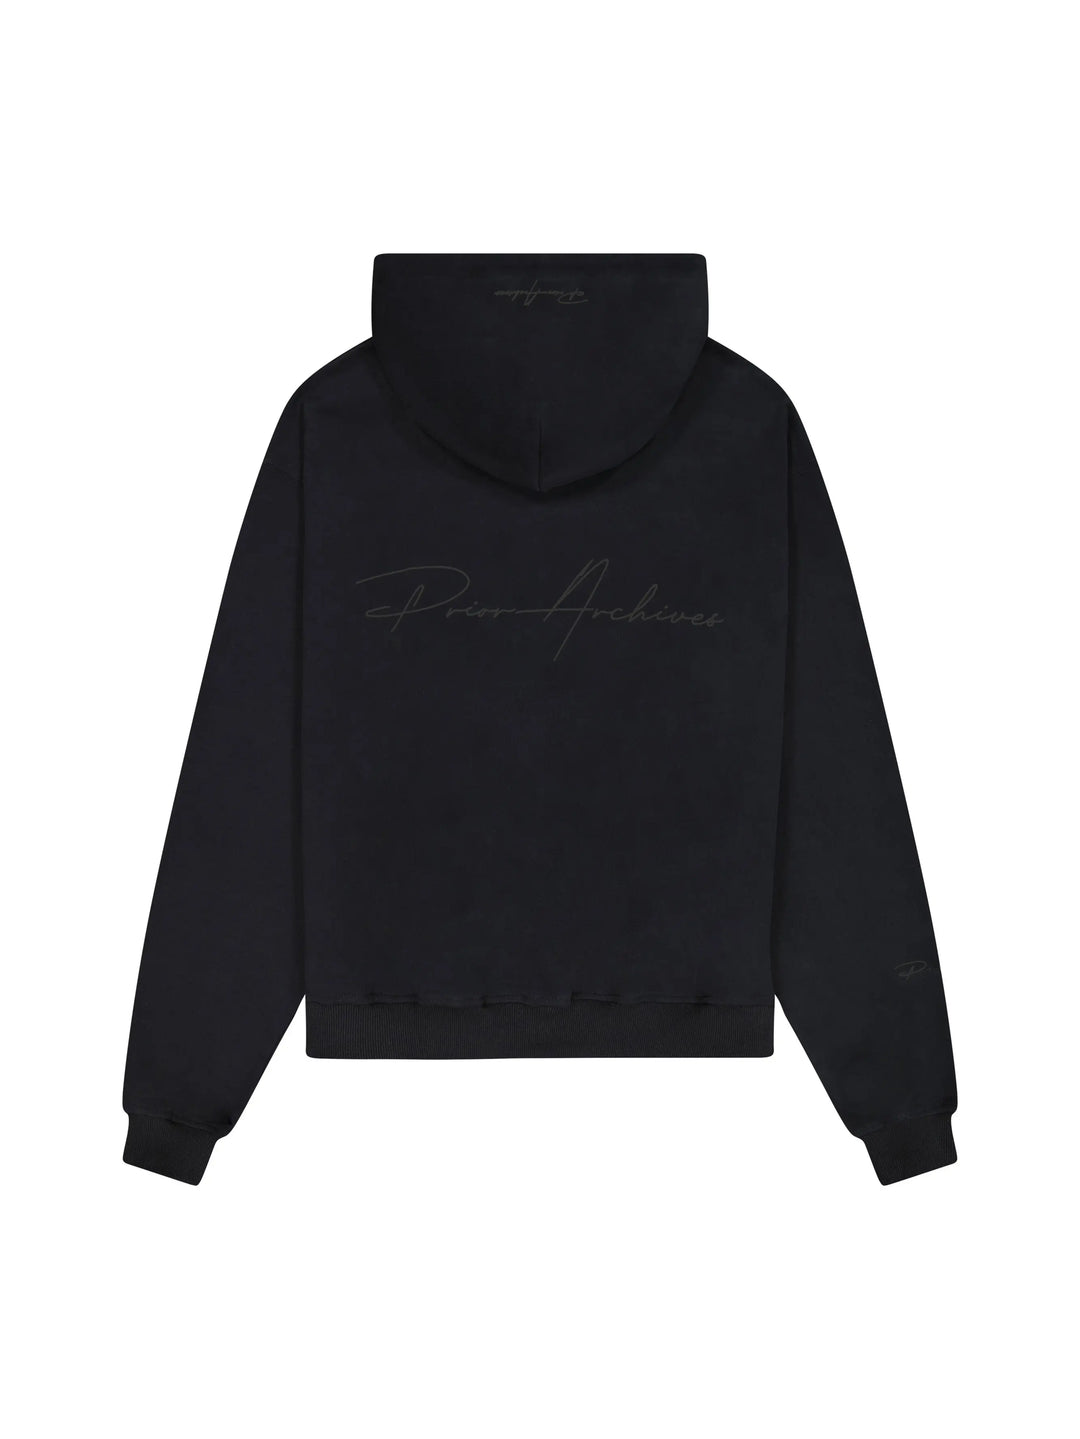 Prior Black Collection Embroidery Logo Oversized Zip-Up Hoodie Onyx in Melbourne, Australia - Prior